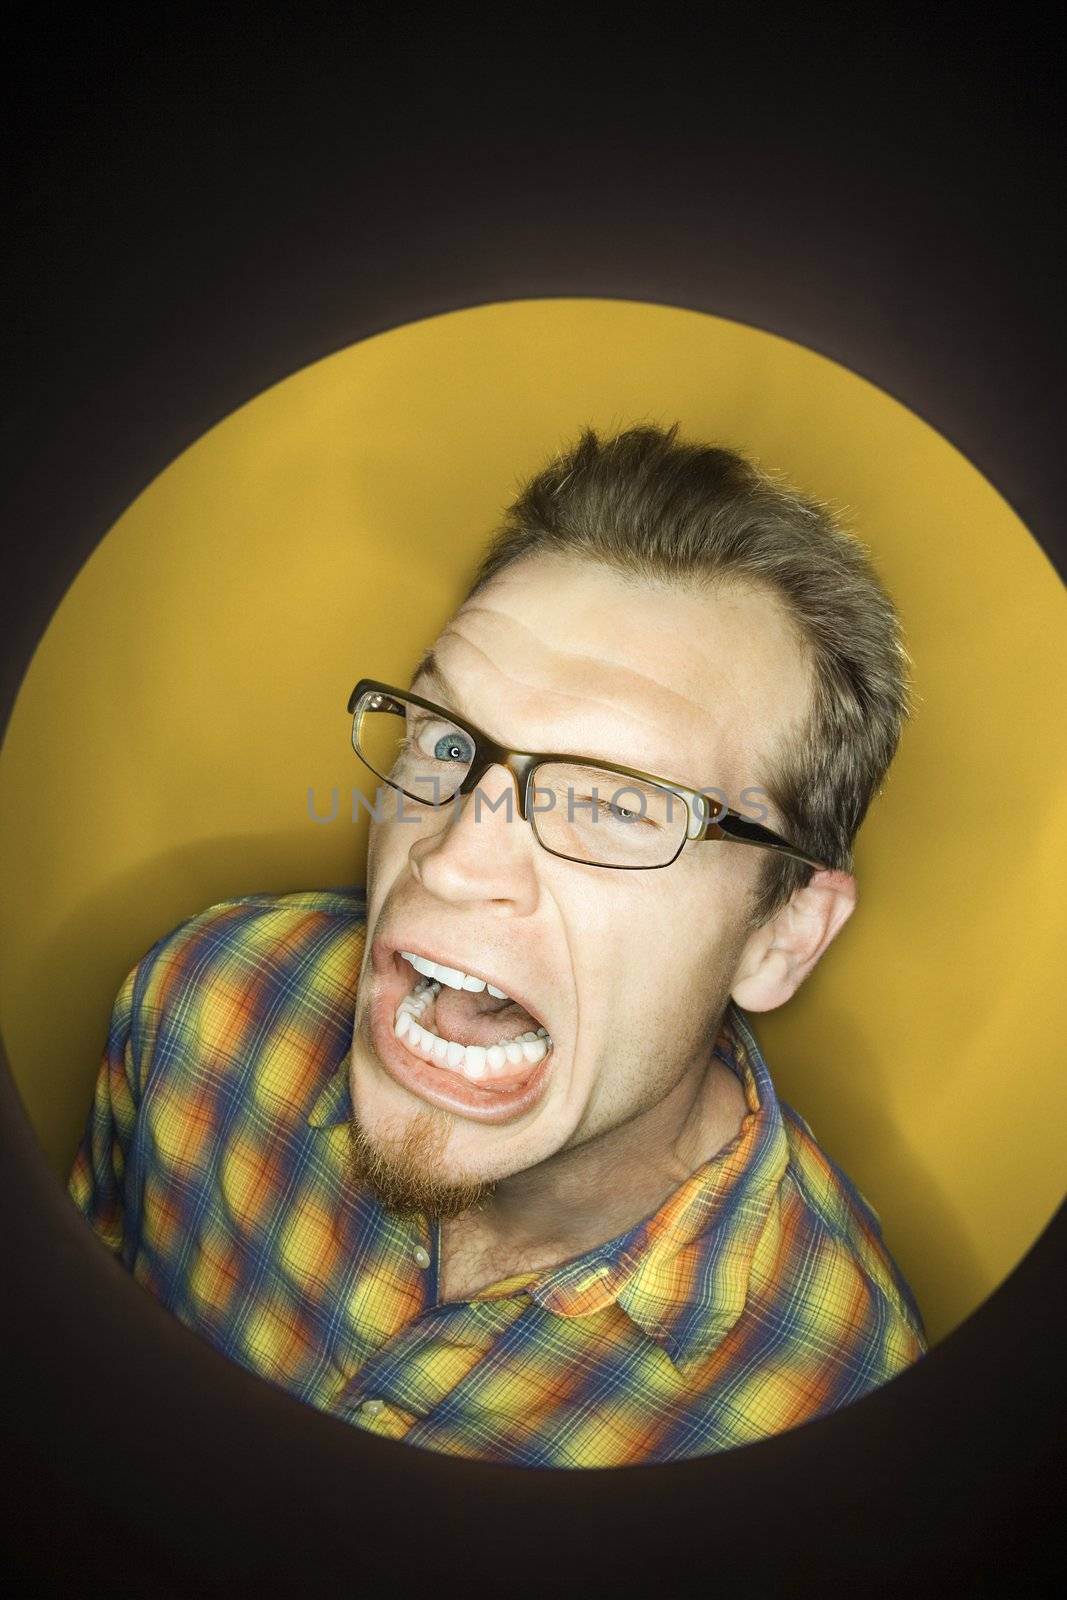 Vignette of adult Caucasian man on yellow background winking and making funny face.